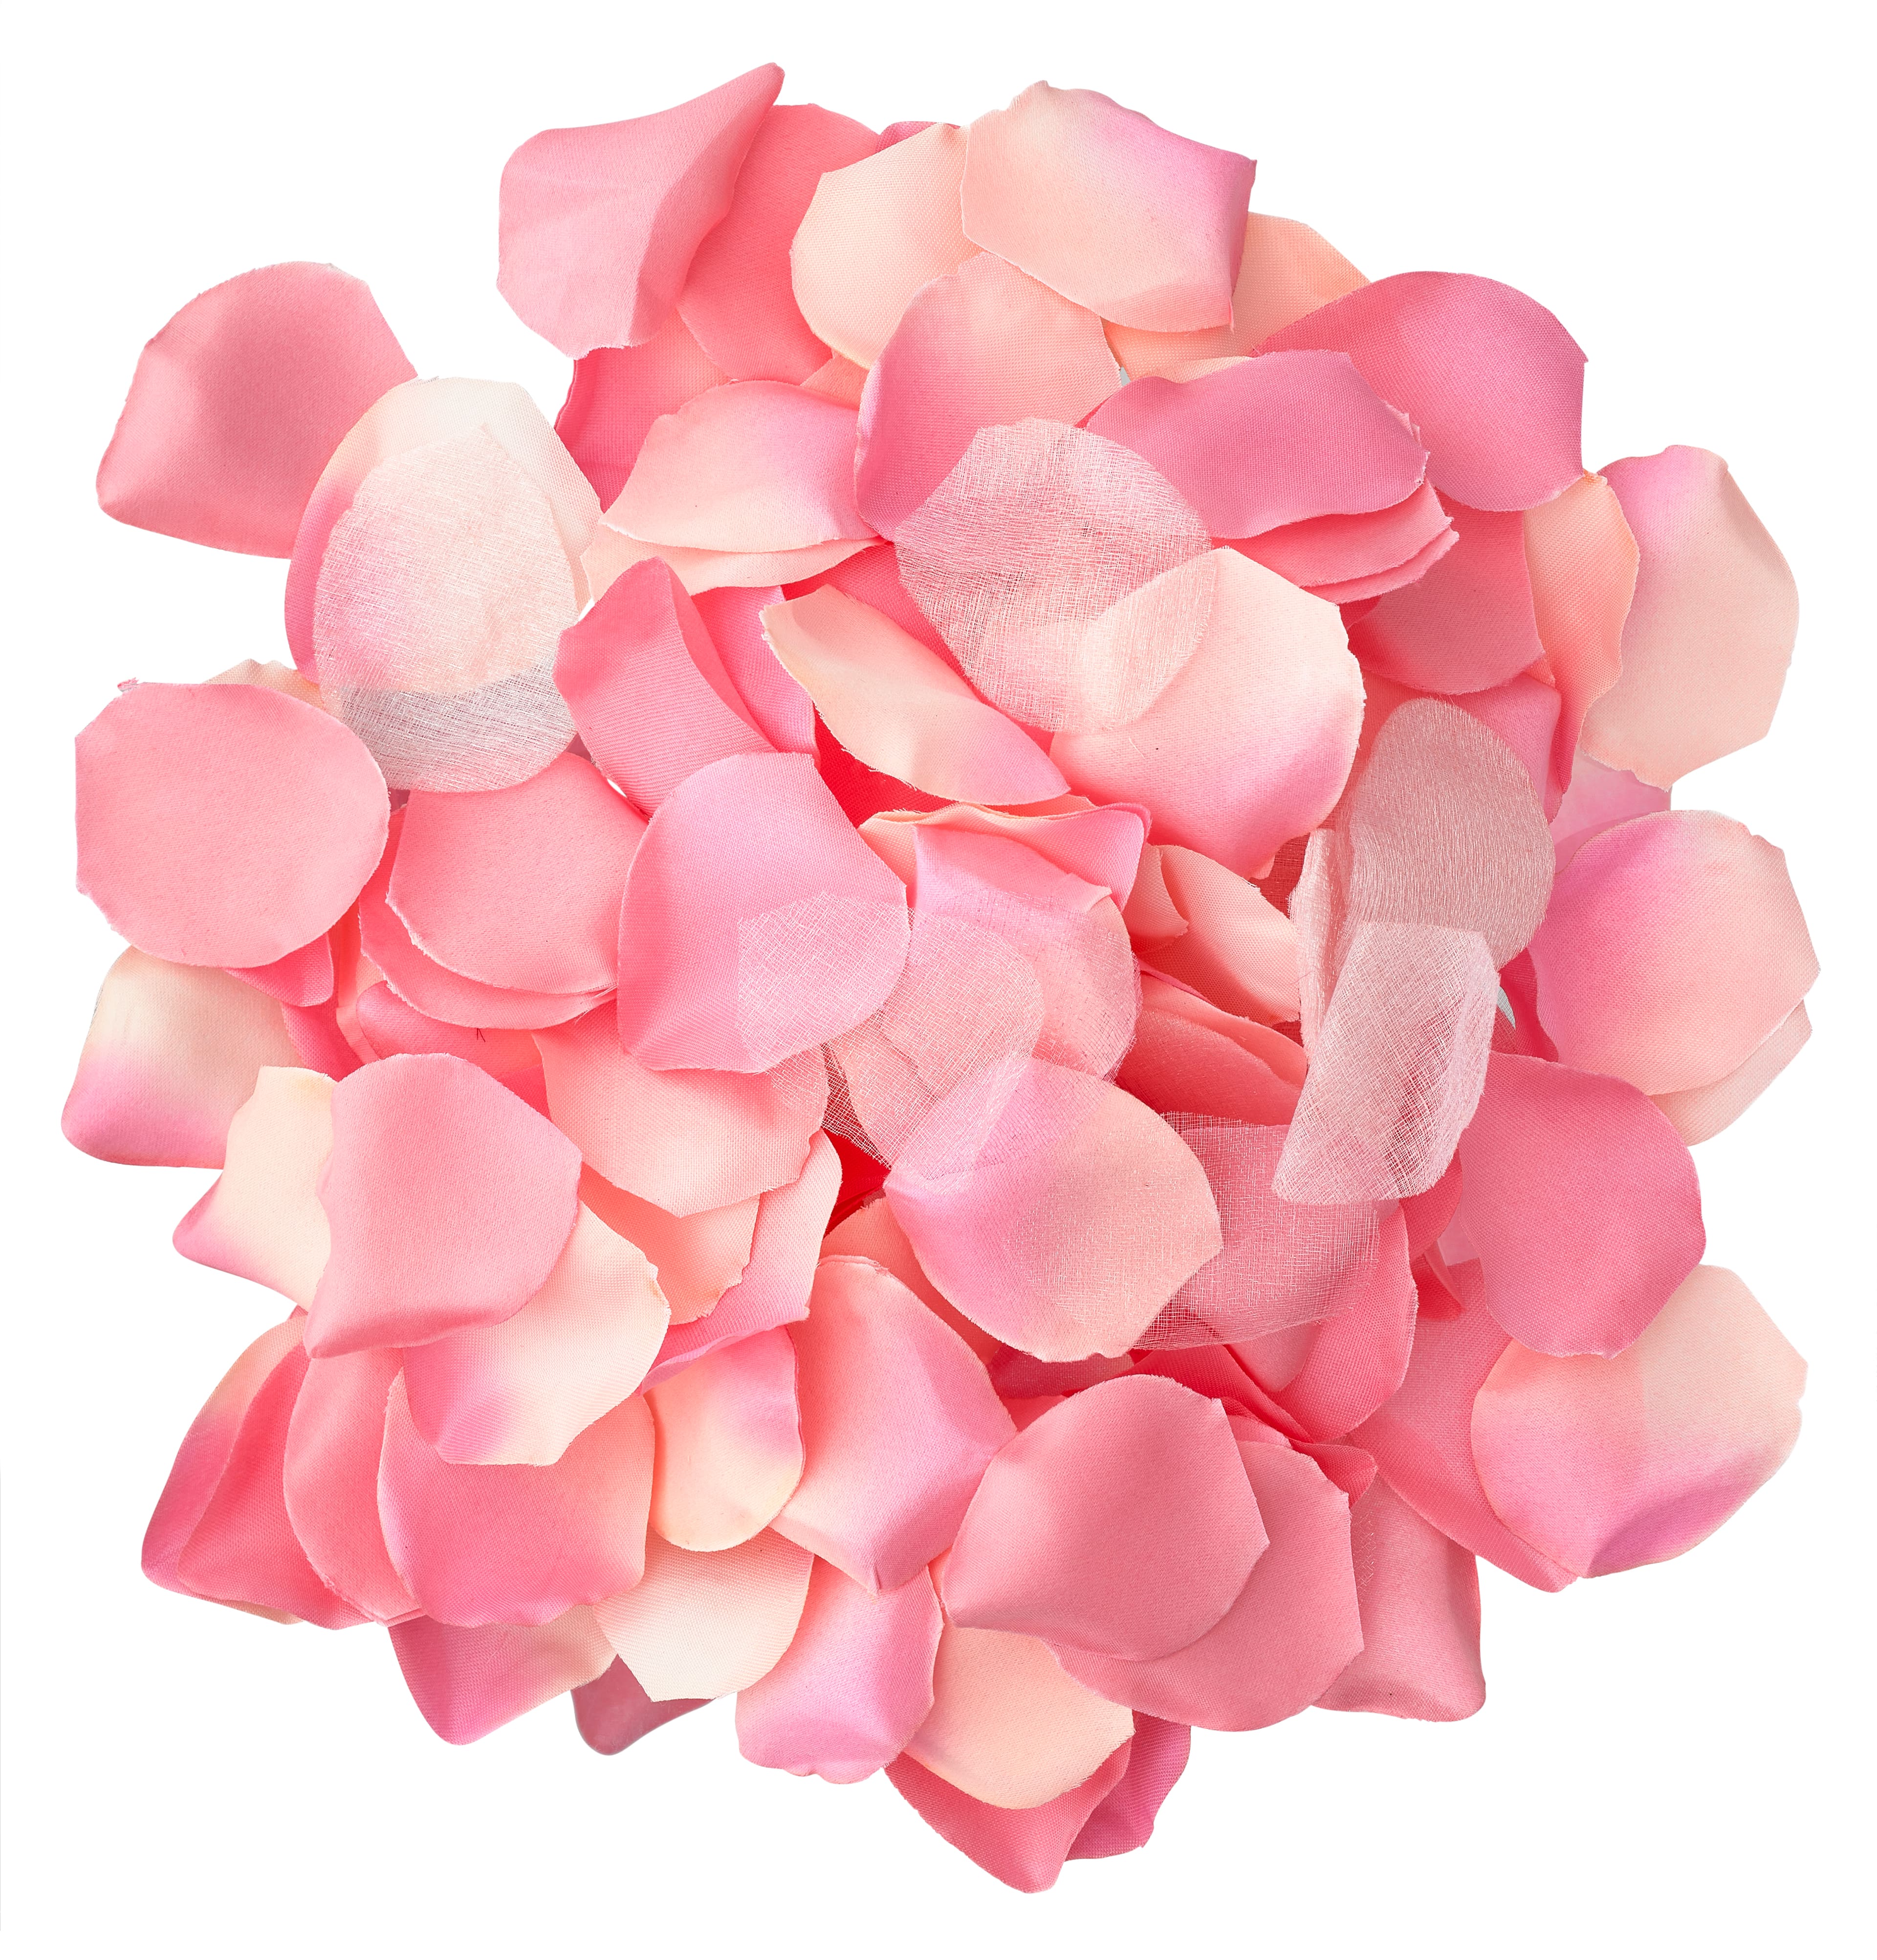 12 Pack: Occasions Pink Decorative Rose Petals by Celebrate It™